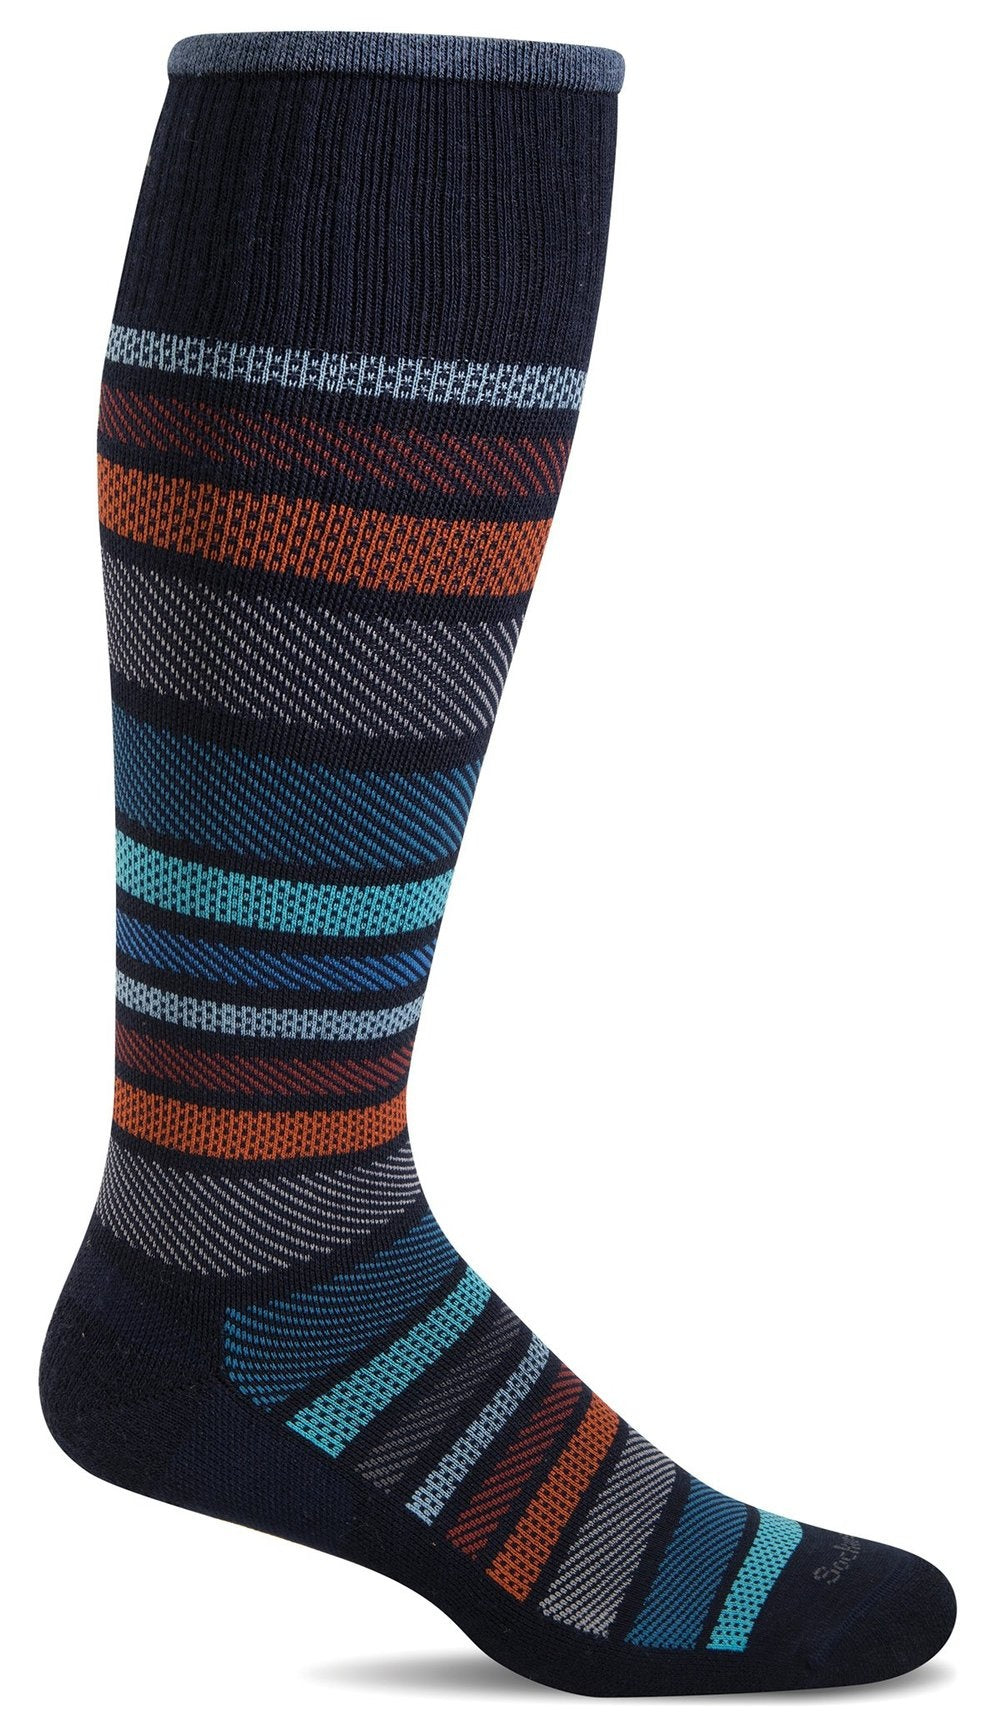 Sockwell Moderate Lifestyle Compression Twillful (Men's) - Navy